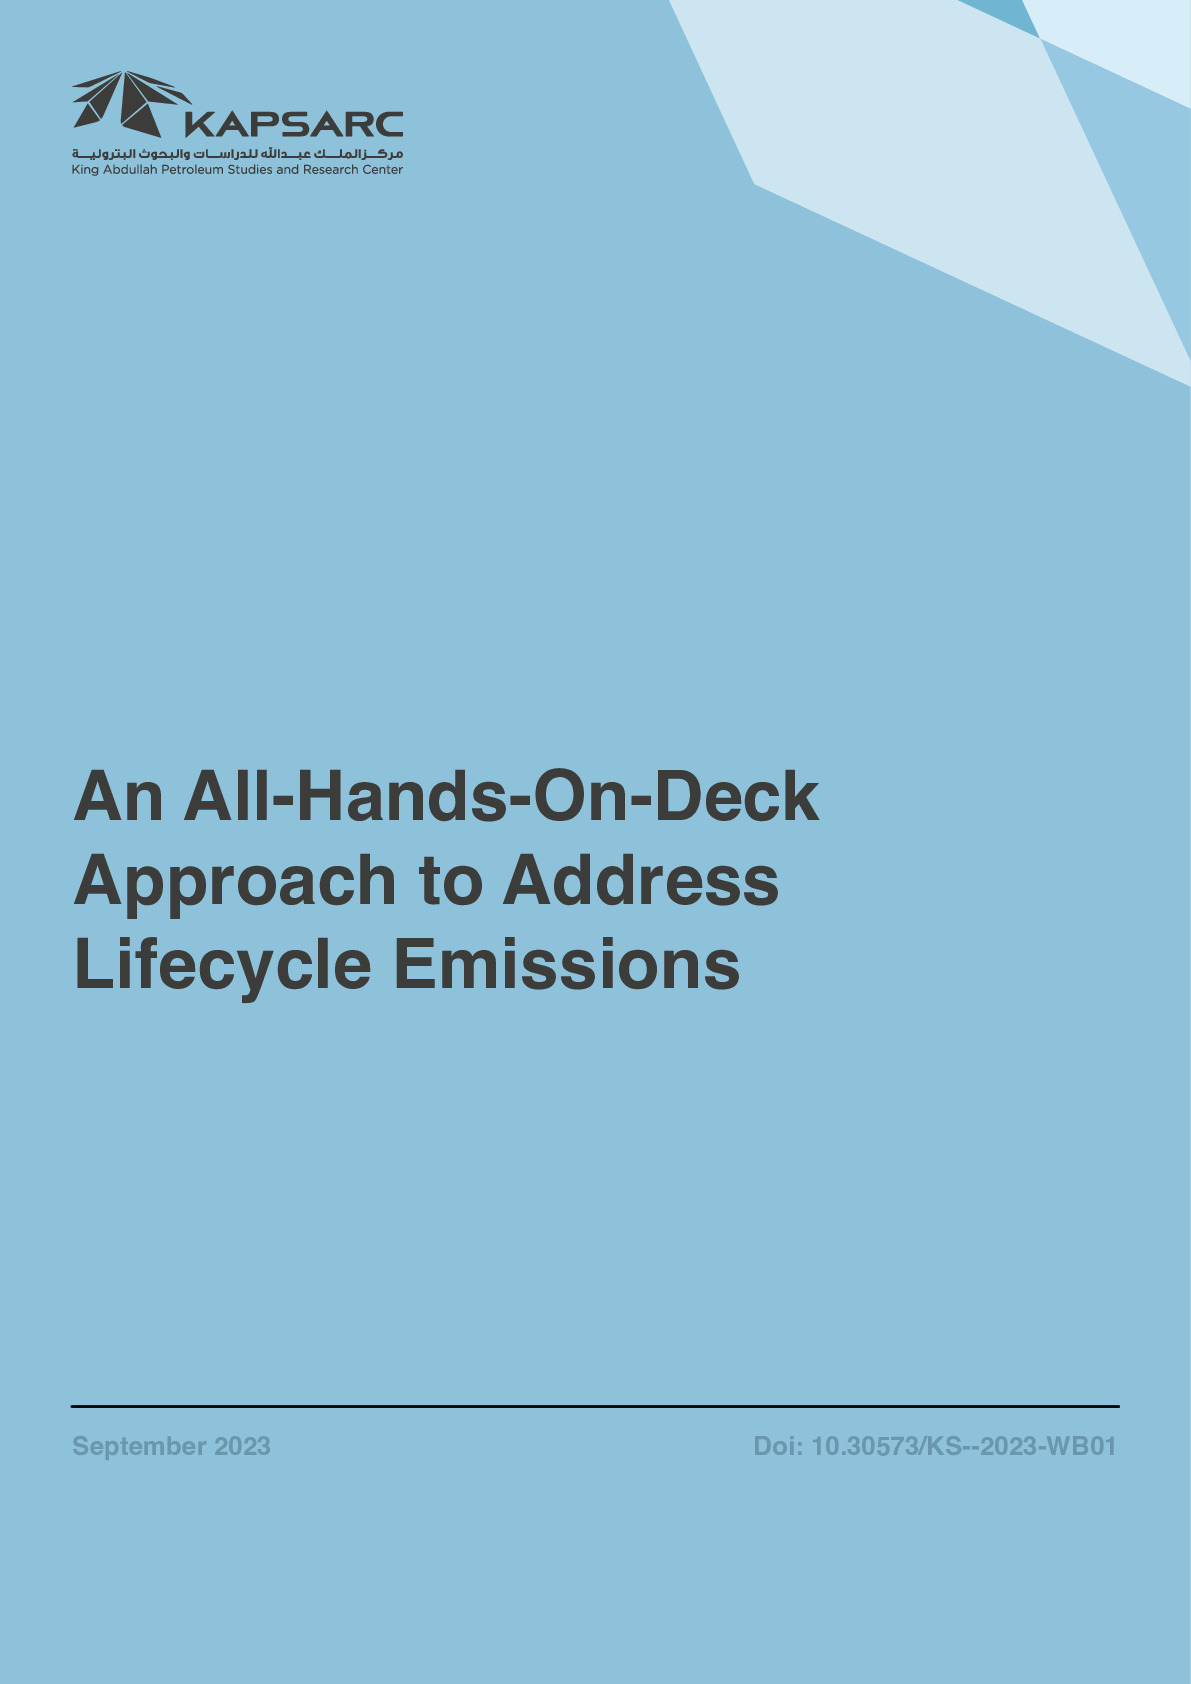 An All-Hands-On-Deck Approach to Address Lifecycle Emissions